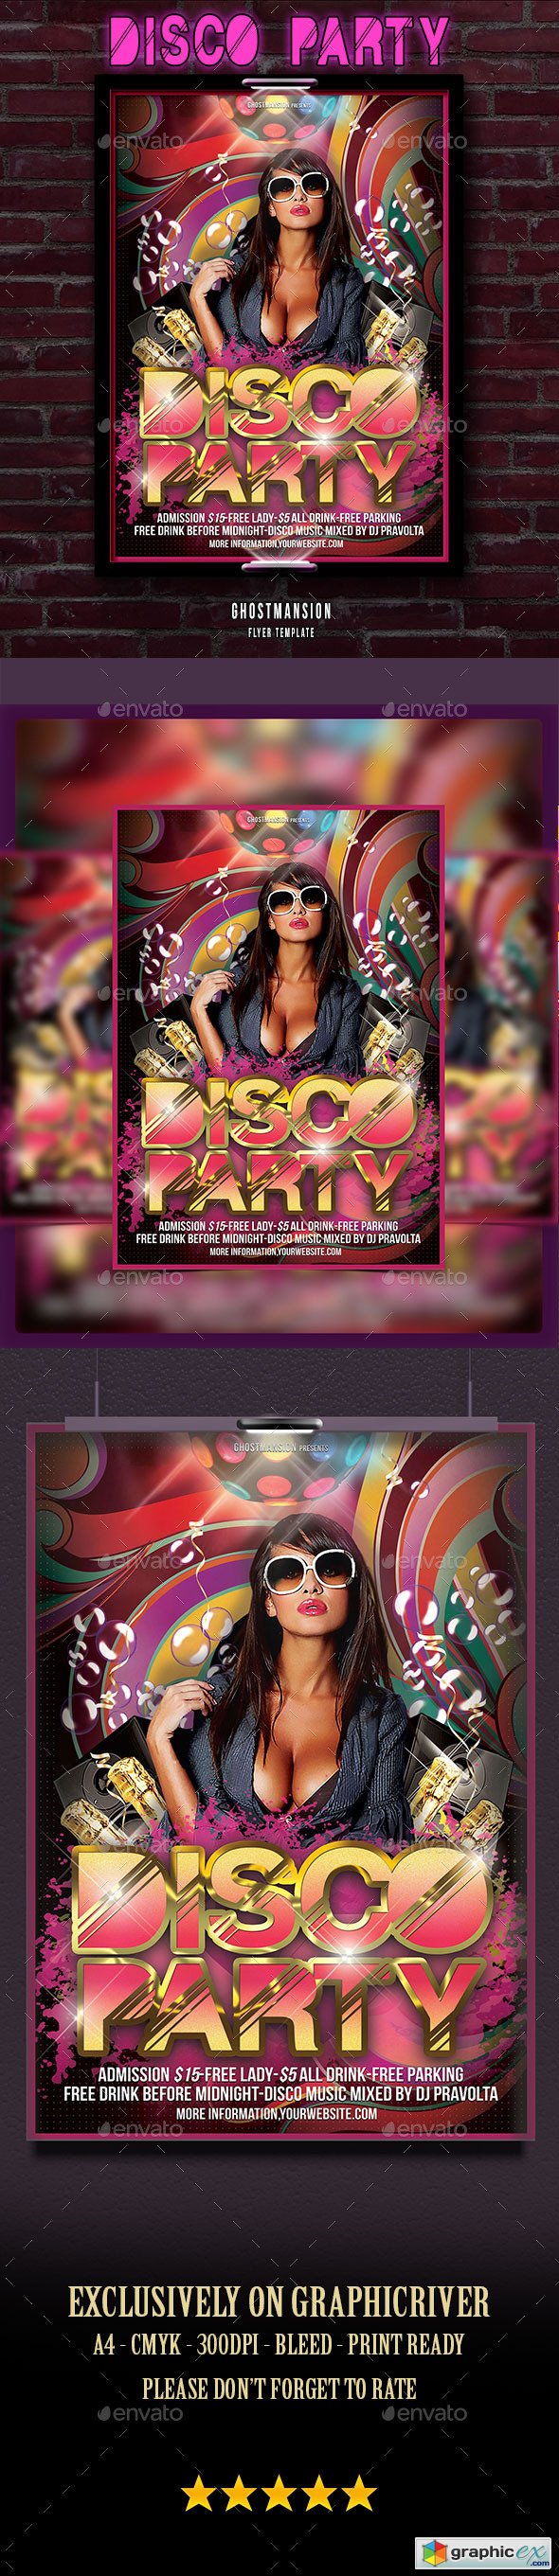 Disco Music Poster Flyer Template